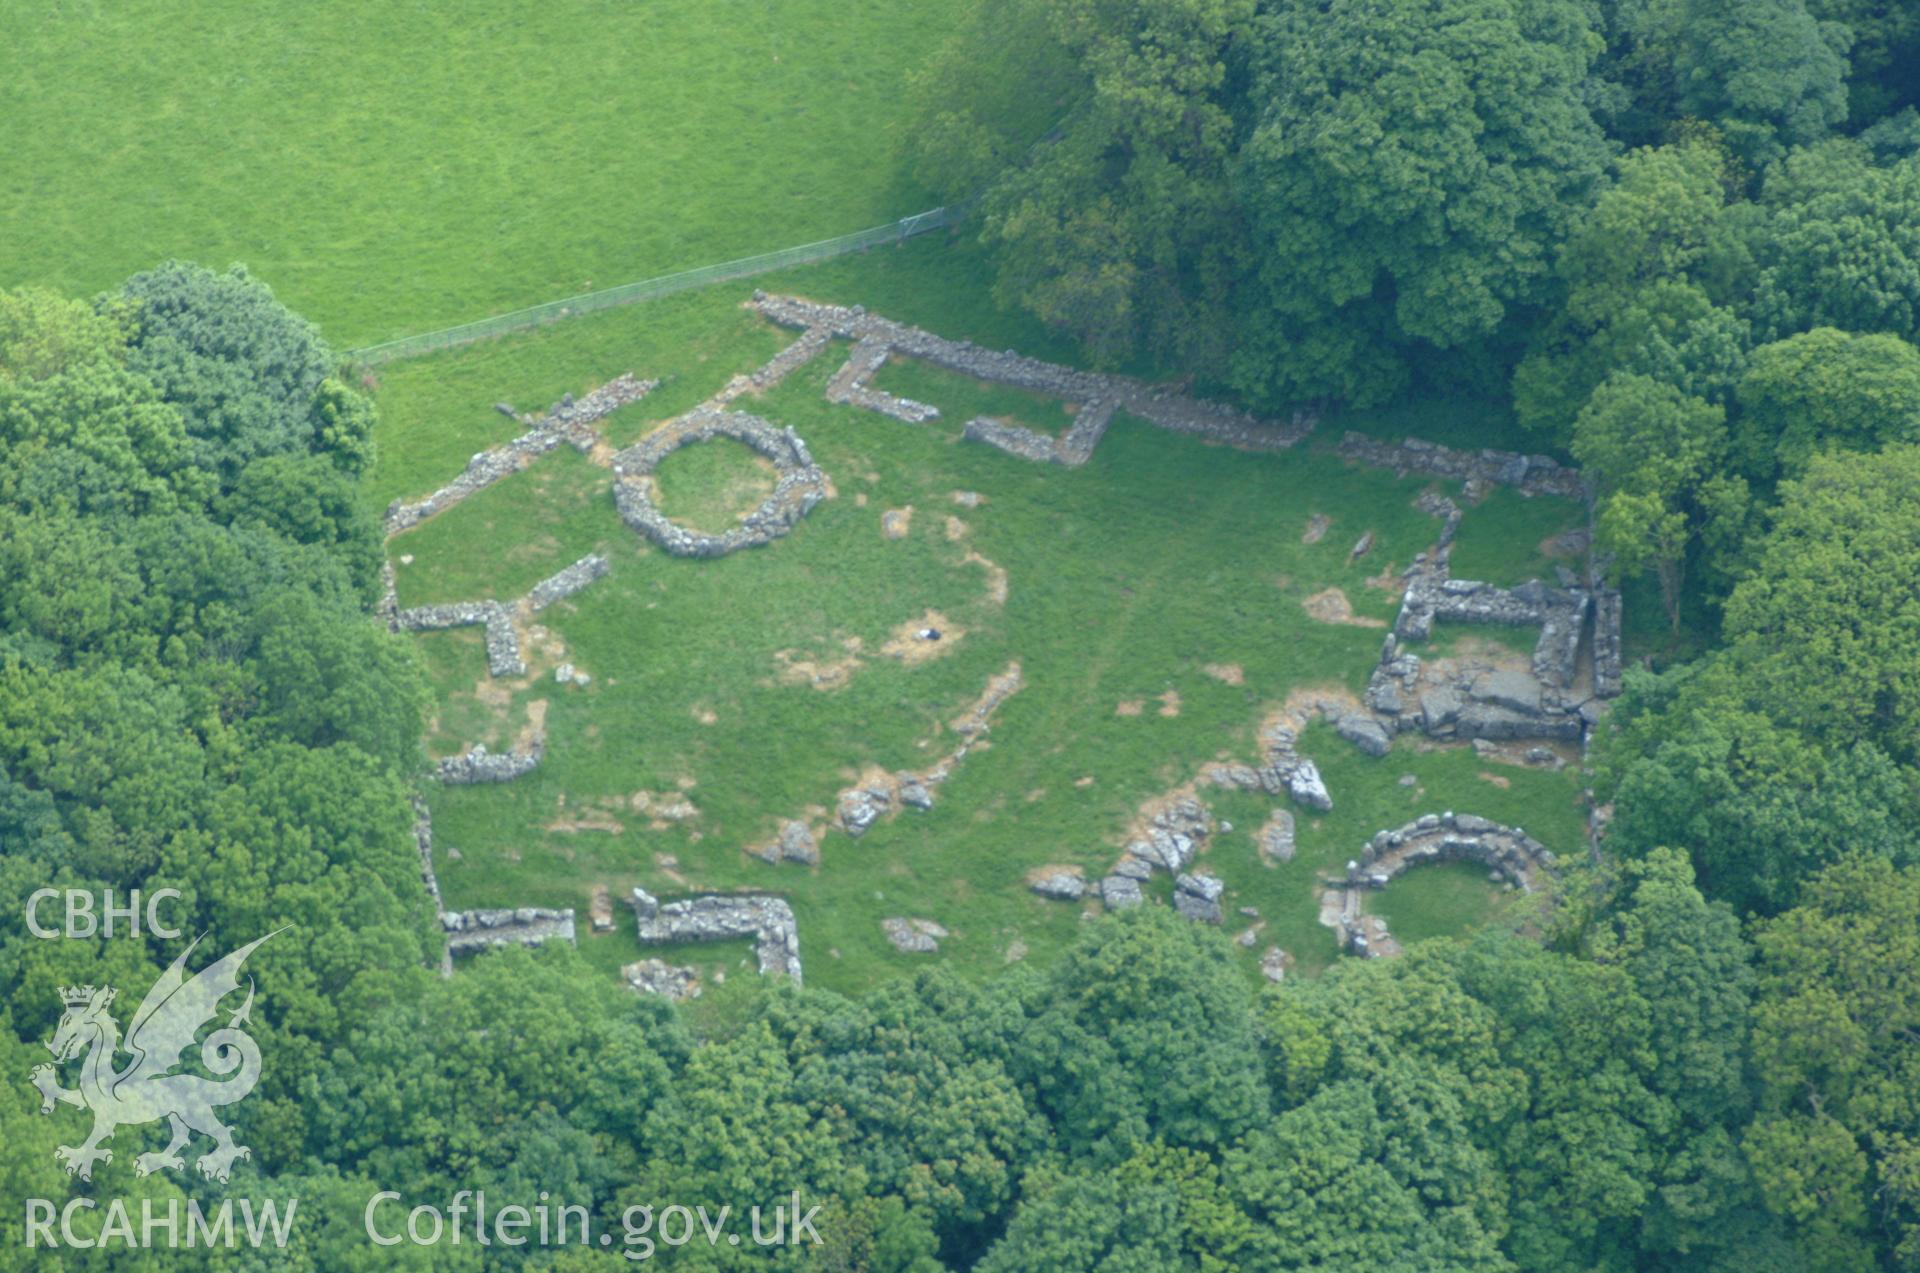 RCAHMW colour oblique aerial photograph of Din Lligwy settlement, Moelfre taken on 26/05/2004 by Toby Driver